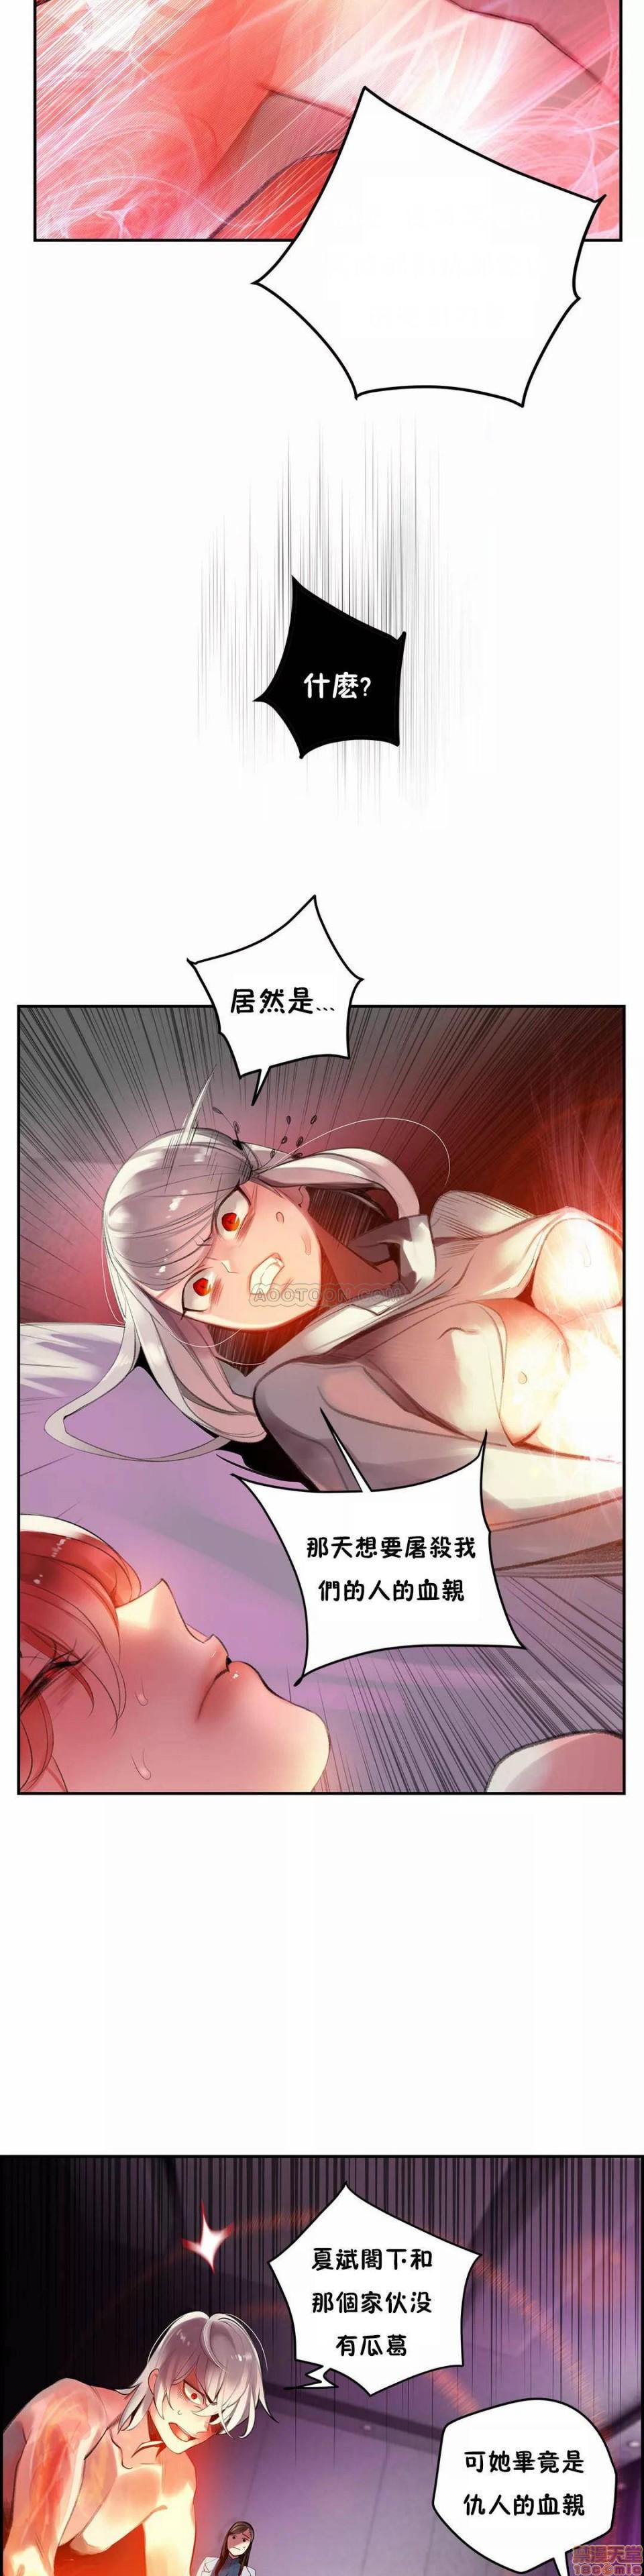 [Juder] Lilith`s Cord (第二季) Ch.77-93 end [Chinese] 9